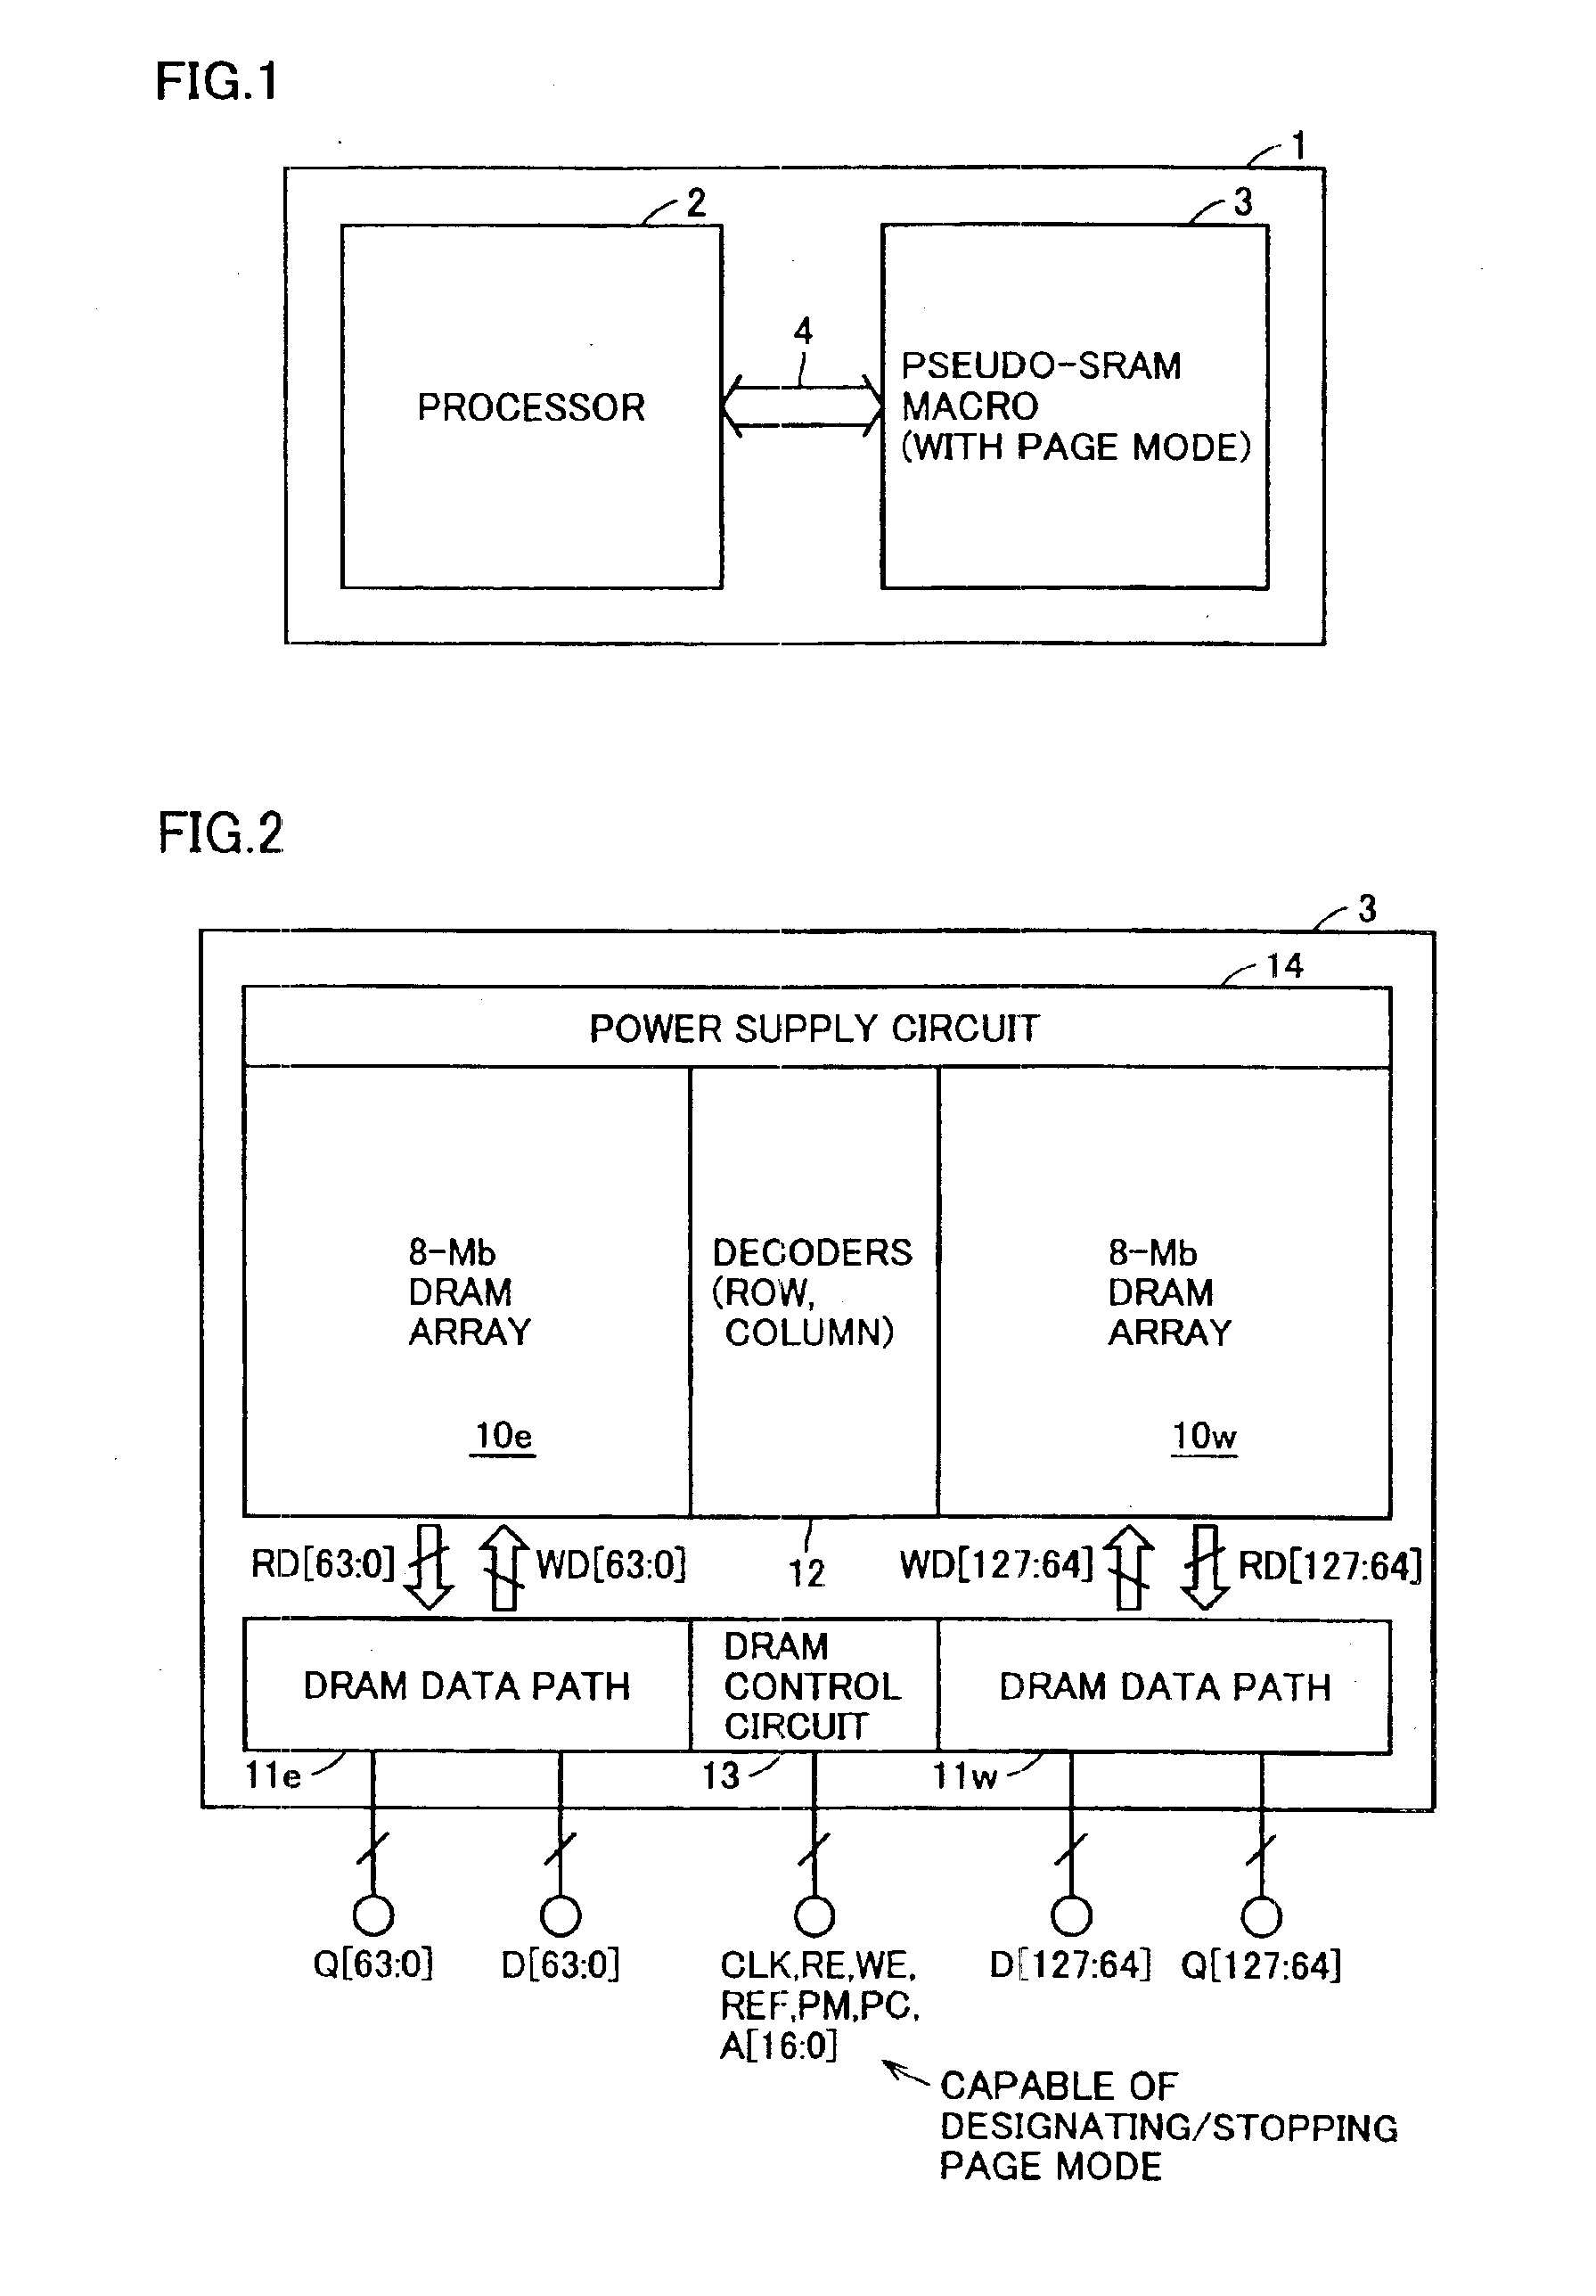 Pseudo-static synchronous semiconductor memory device